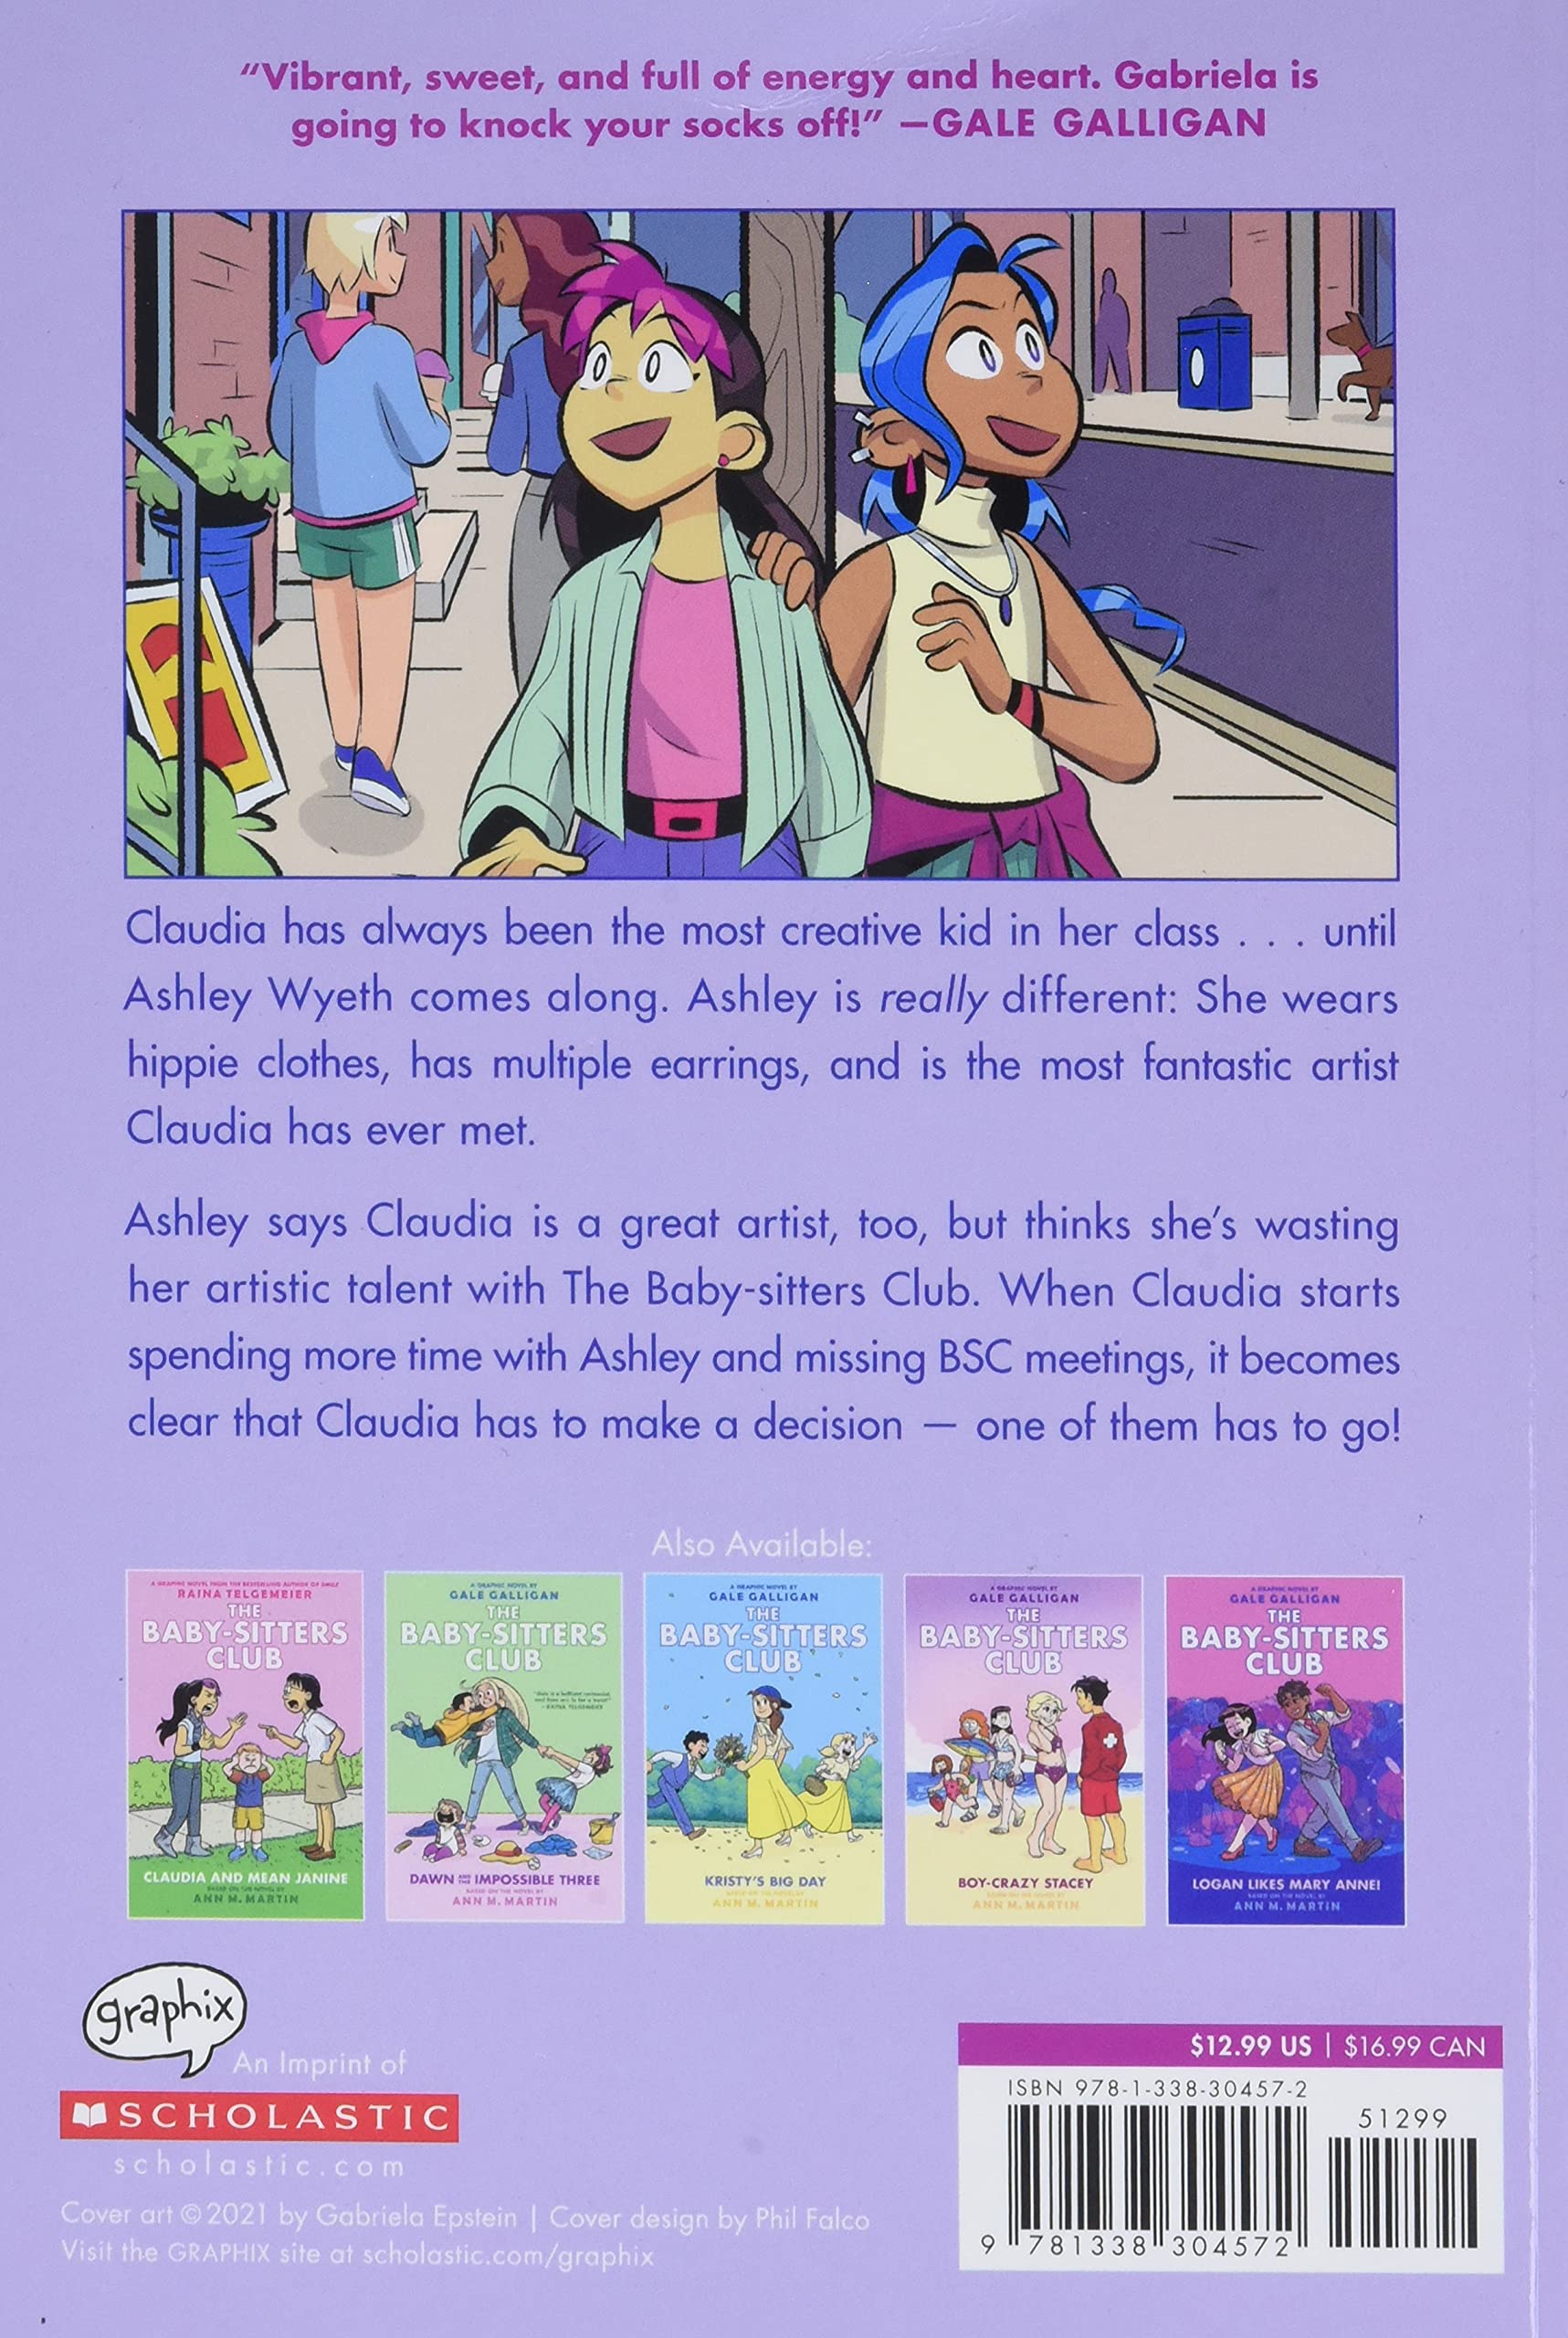 Claudia and the New Girl: A Graphic Novel (The Baby-Sitters Club #9) (9) (The Baby-Sitters Club Graphix)